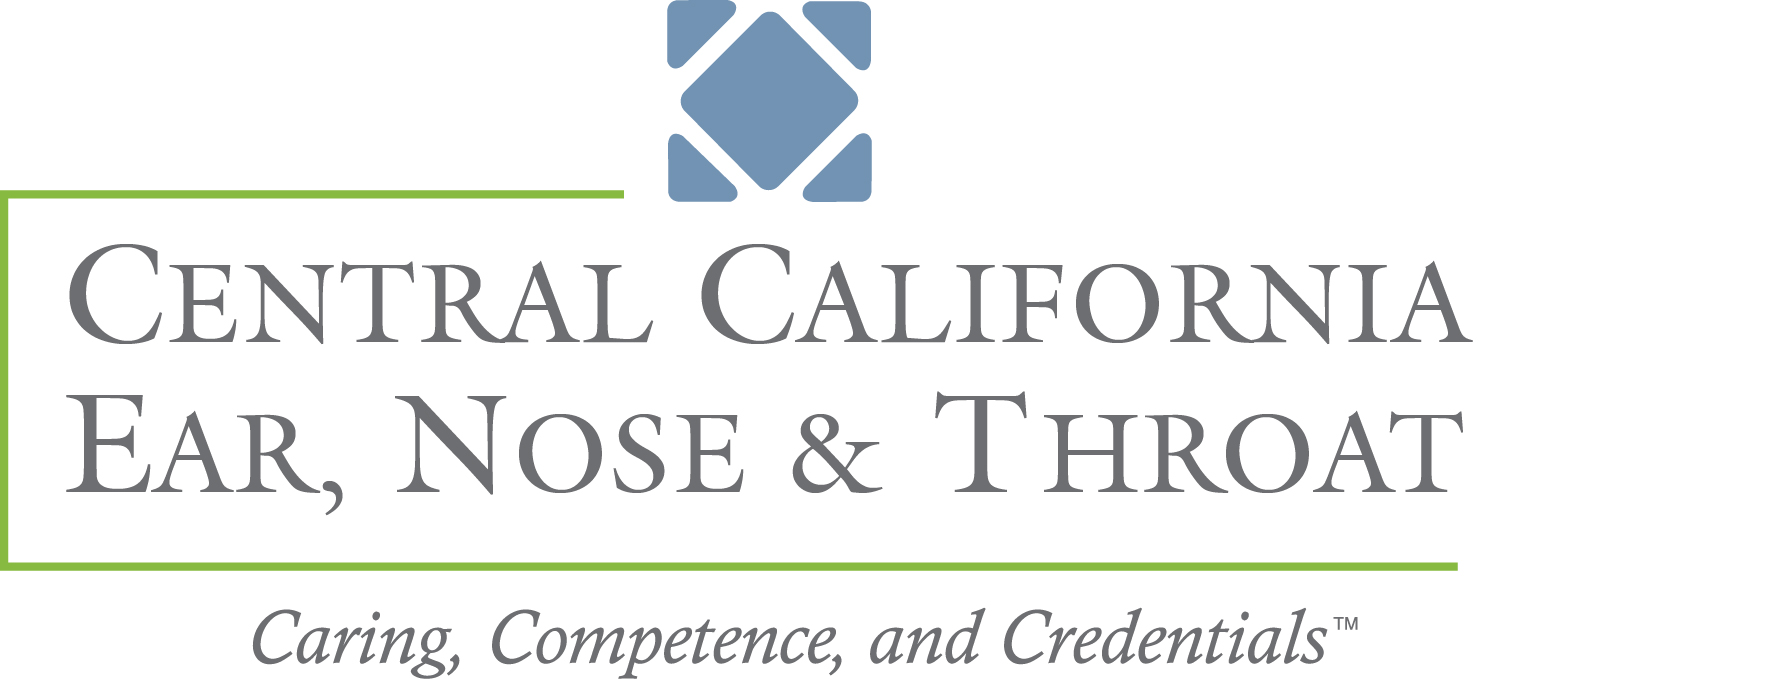 COMPREHENSIVE Audiologist Opportunity in Central California | $70,000 - $95,000